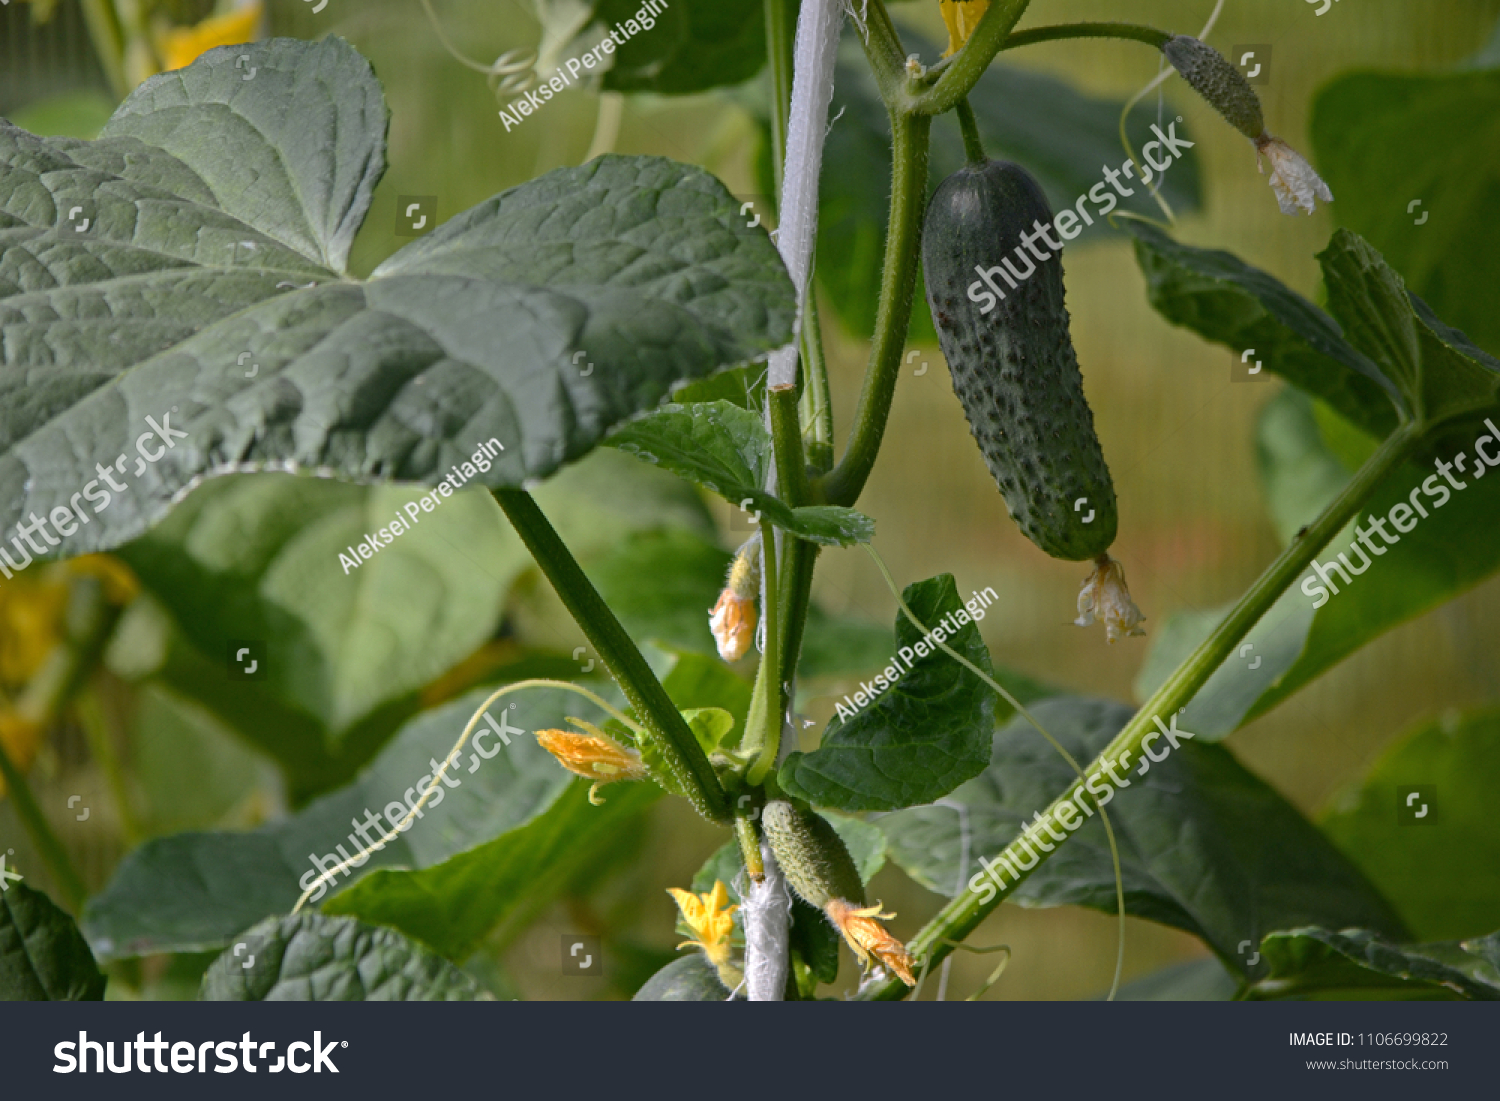 Fresh young green cucumber hanging on a branch #1106699822